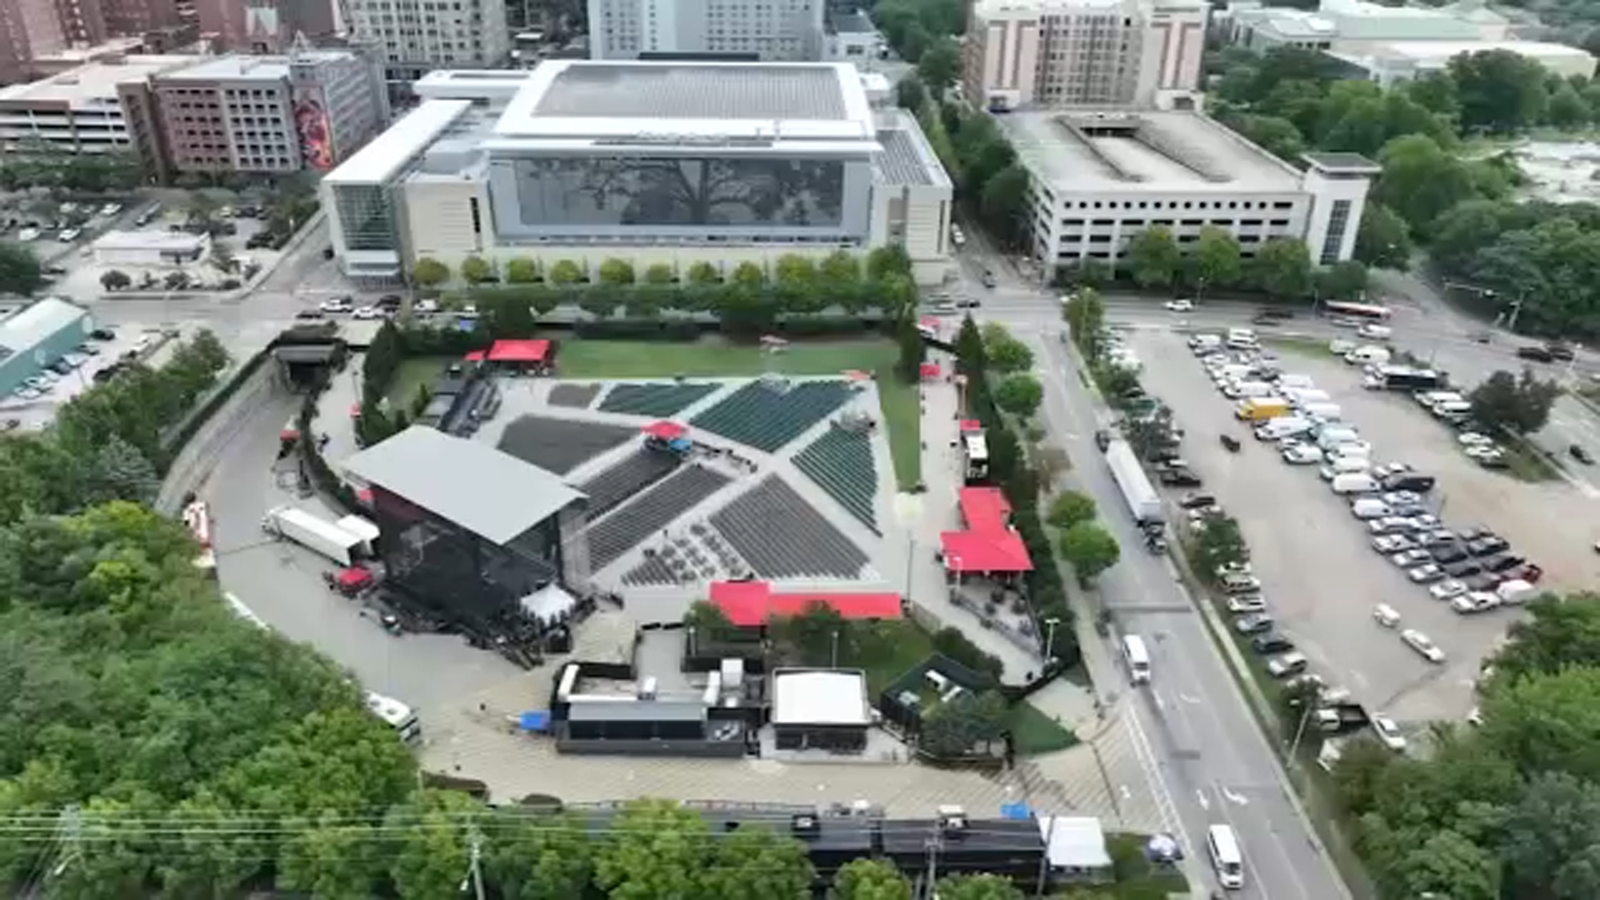 Red Hat Amphitheater | Future of an entertainment venue in limbo as Raleigh leaders, business owners talk expansion plans [Video]